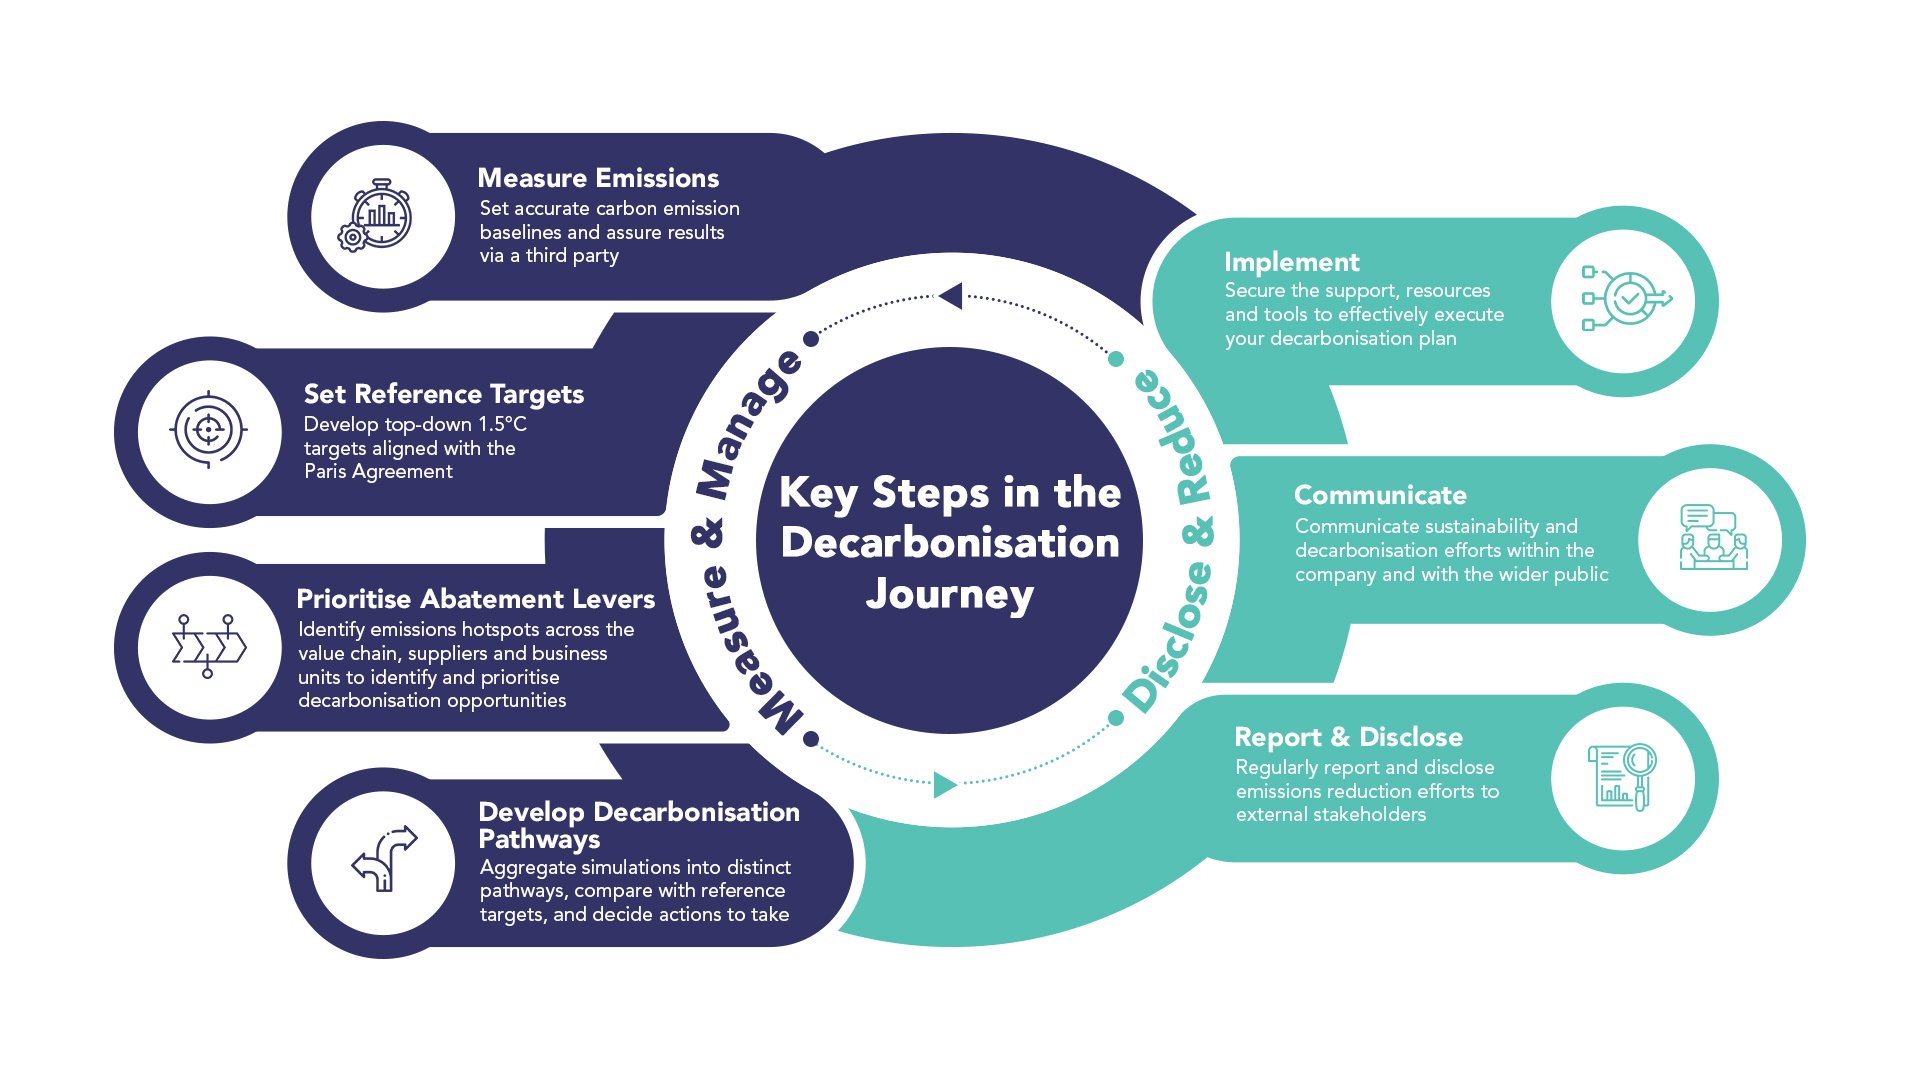 _Key steps in the decarbonisation journey_